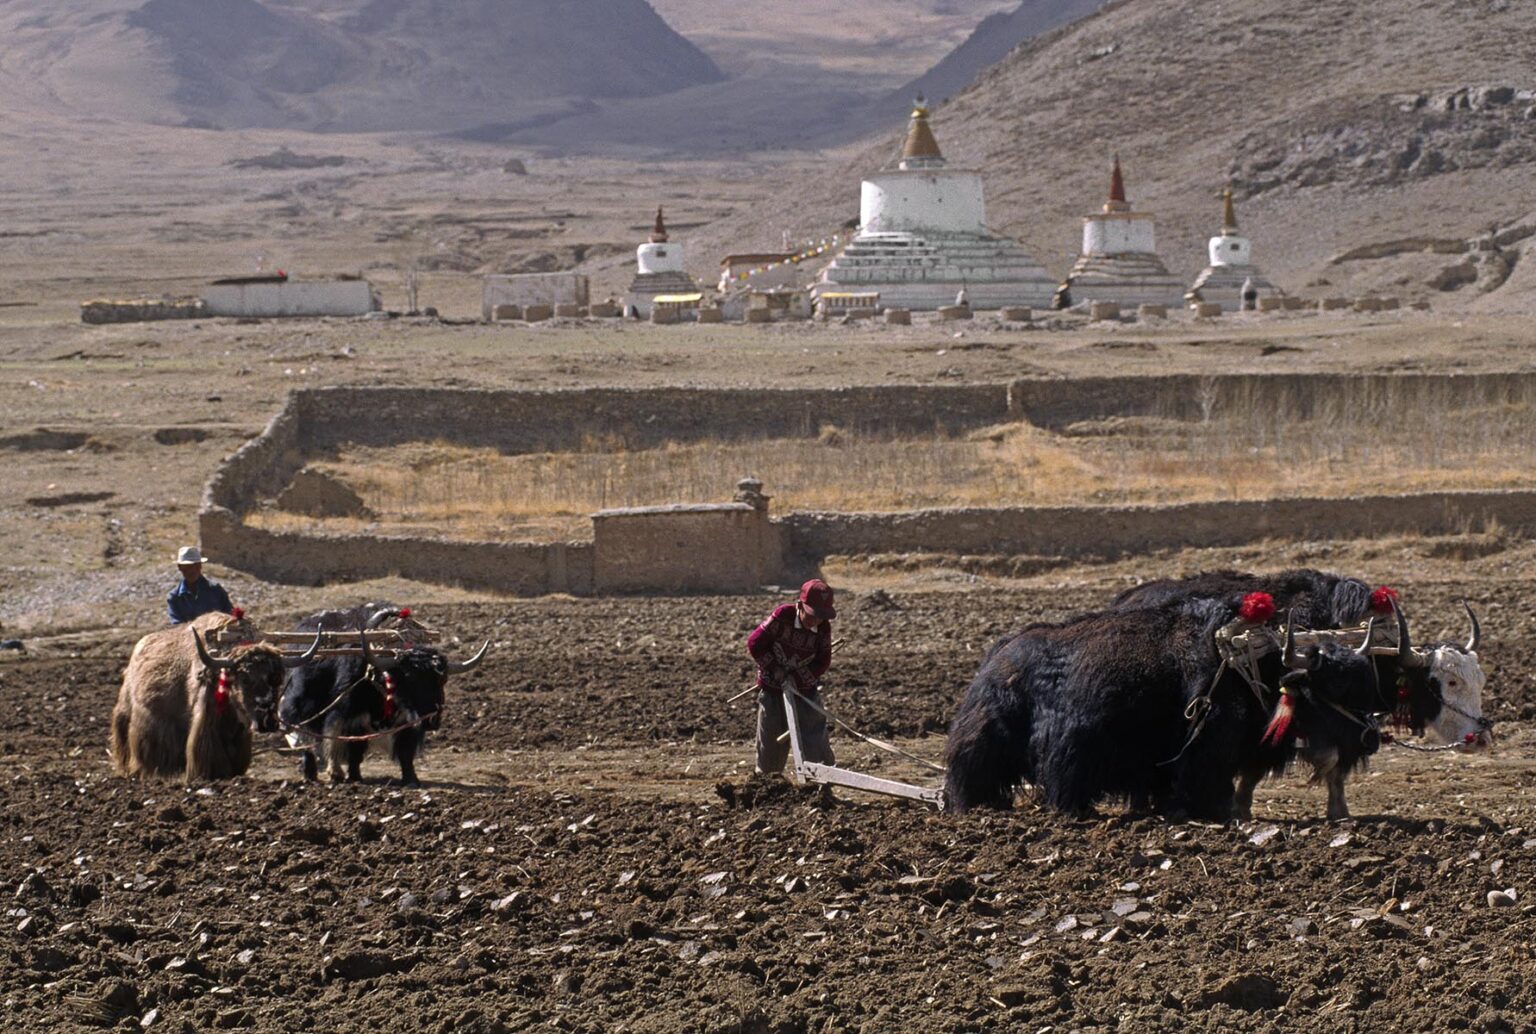 TIBETANS PLOW the land with YAKS preparing the soil for planting near their village - CENTRAL TIBET